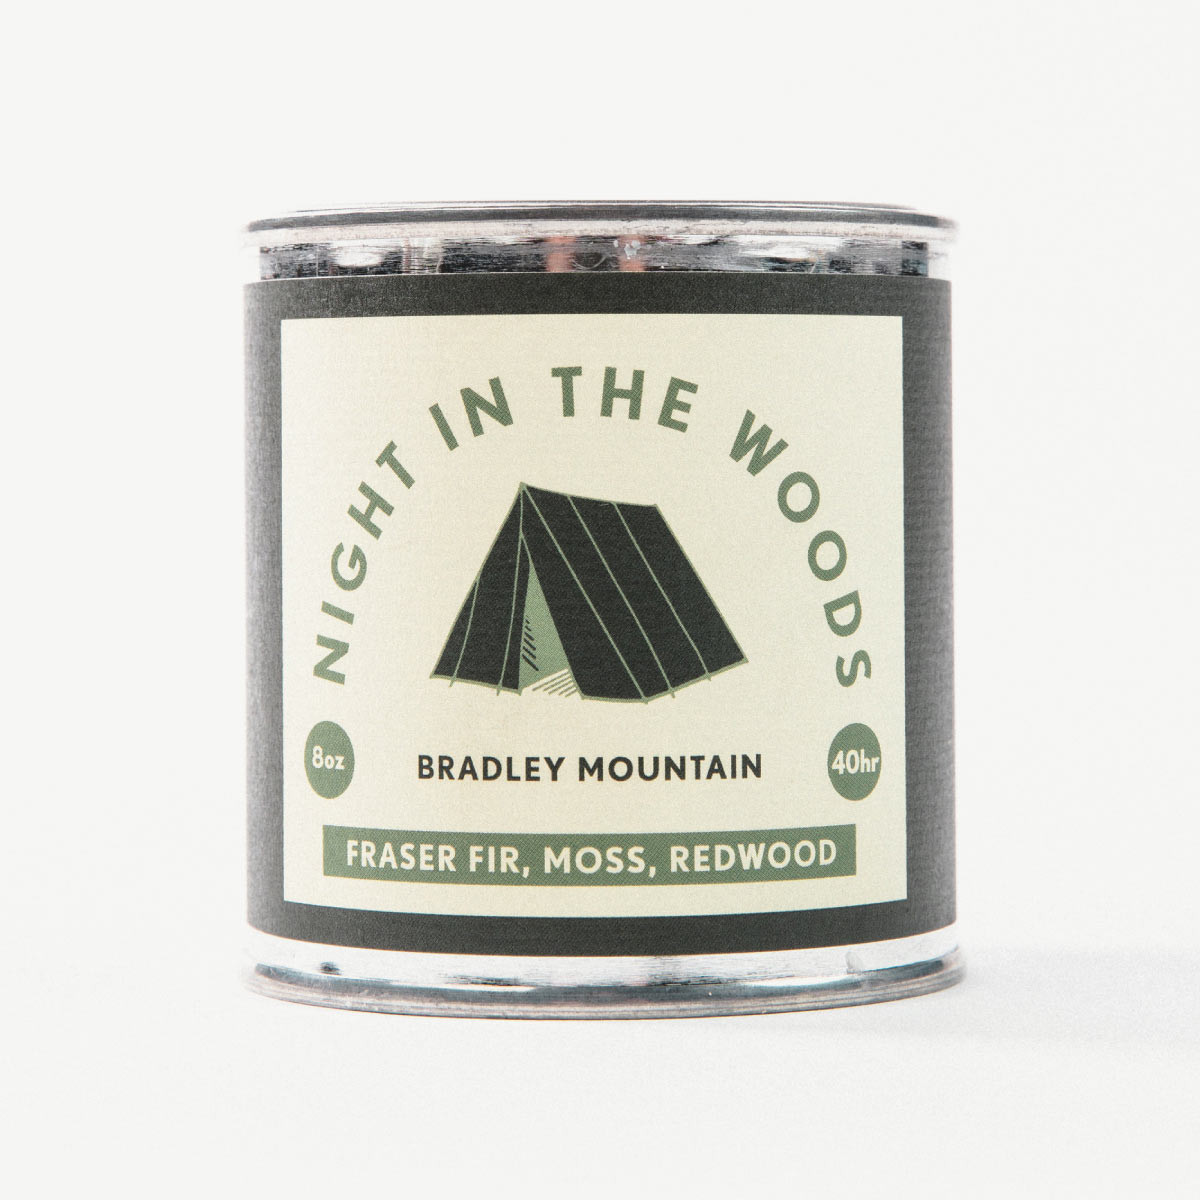 Stinson Beach Scented Soy Wax Candle